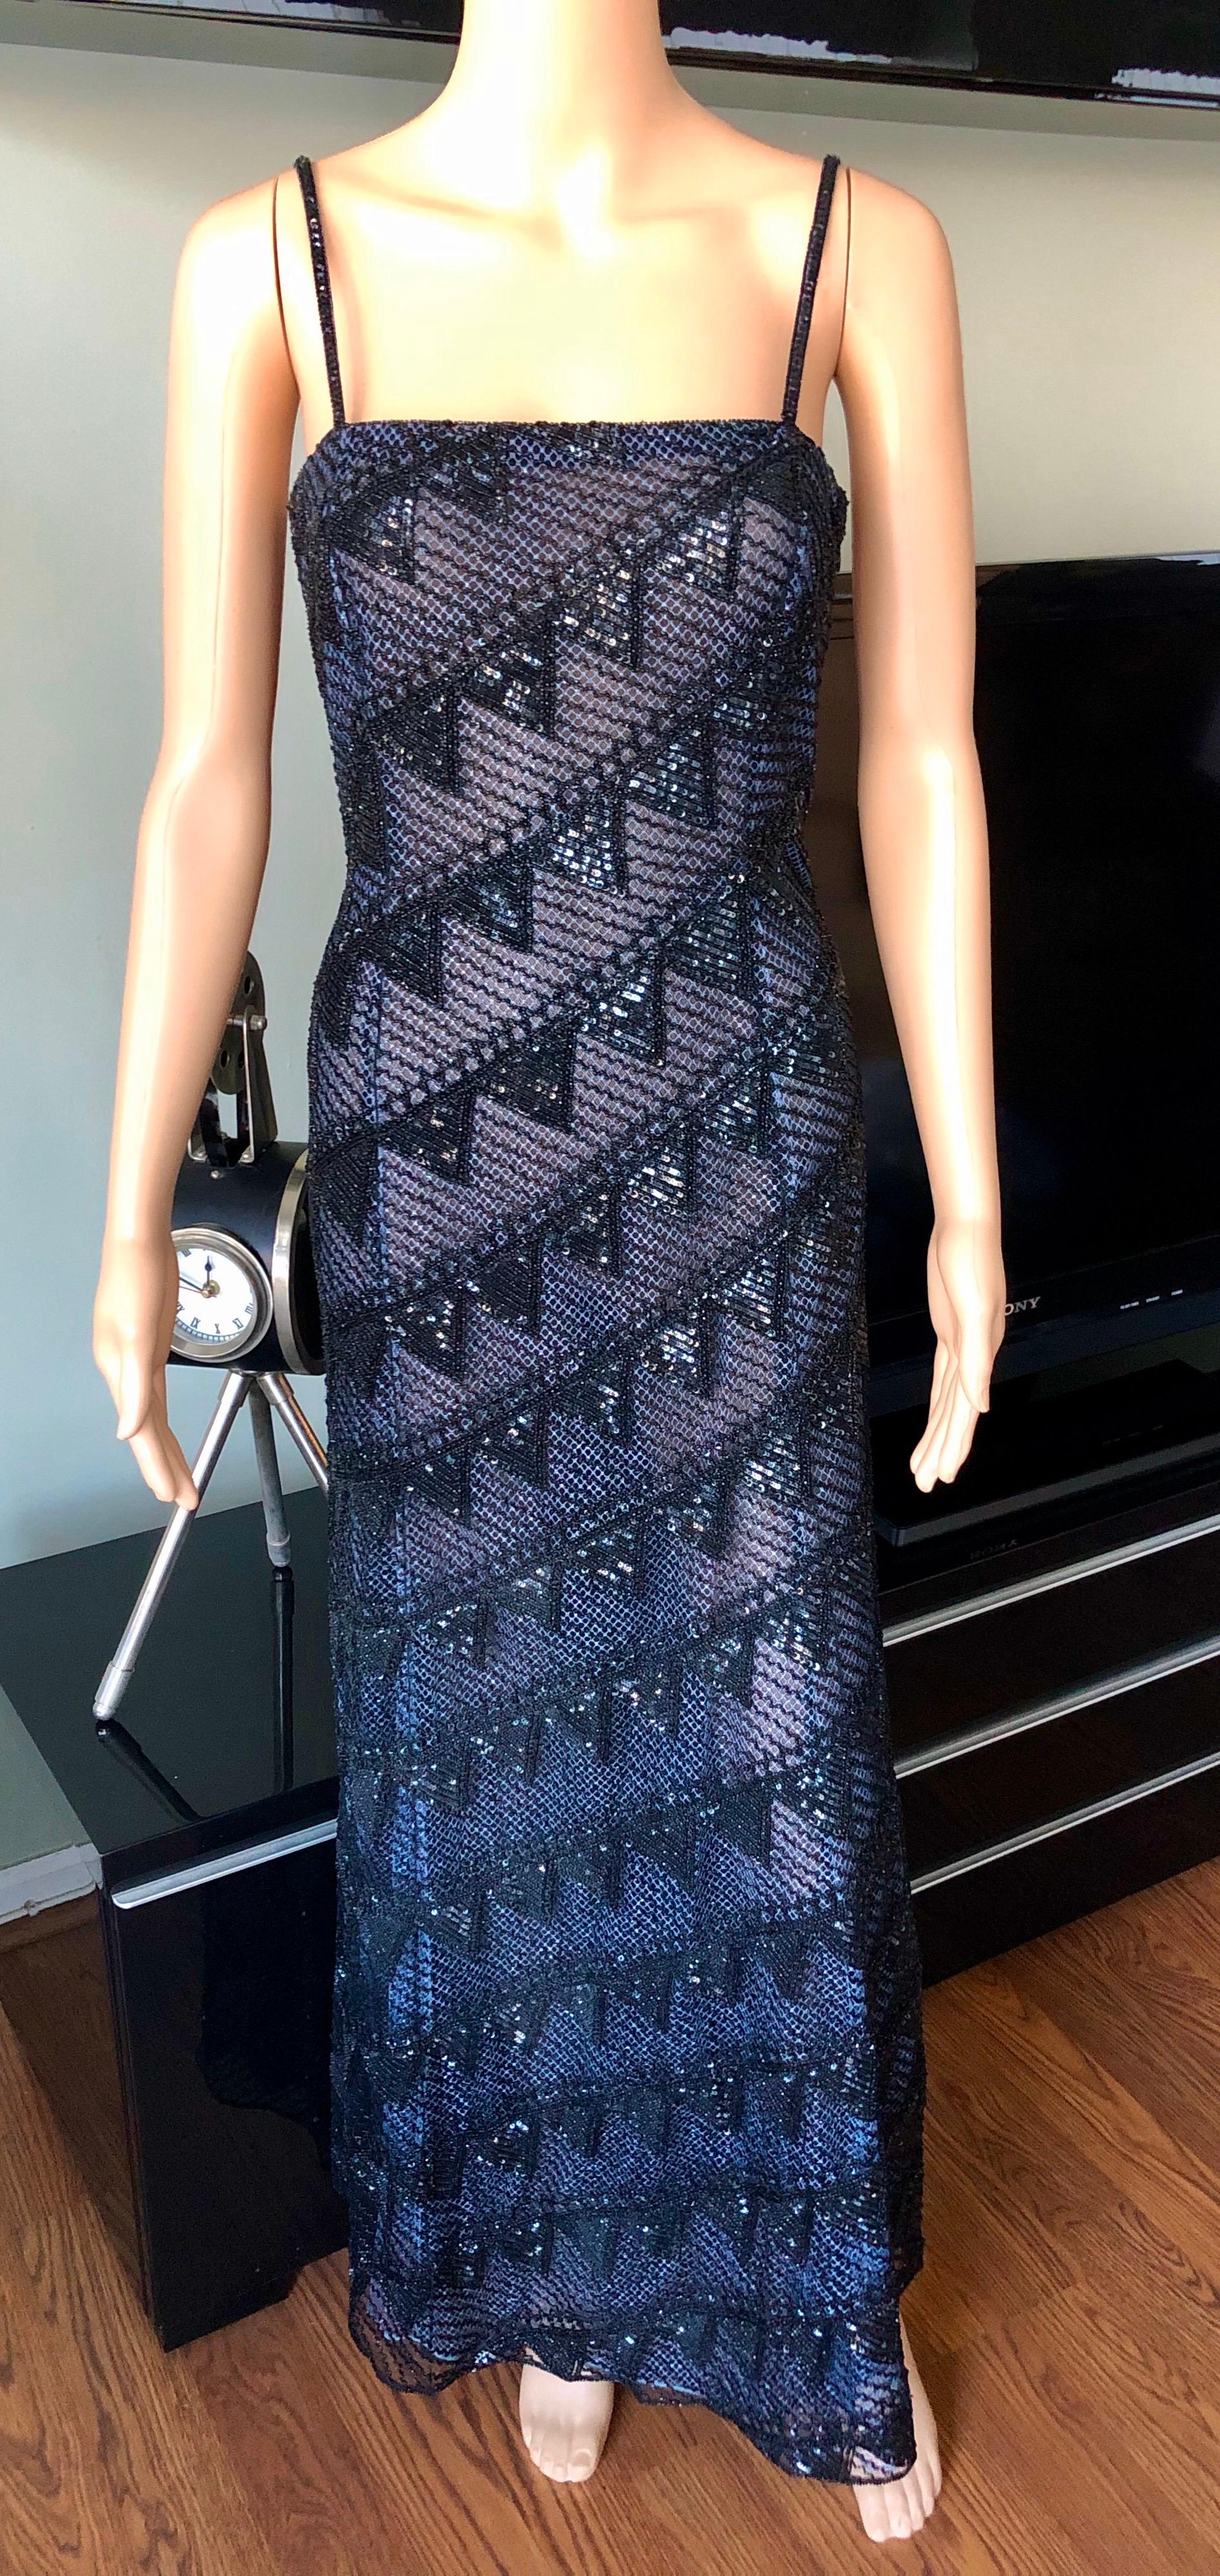 Giorgio Armani F/W 1999 Runway Vintage Embellished Sheer Mesh Black Dress Gown IT 42

Excellent Condition

Please see below the approximate measurements: 
Chest: 32